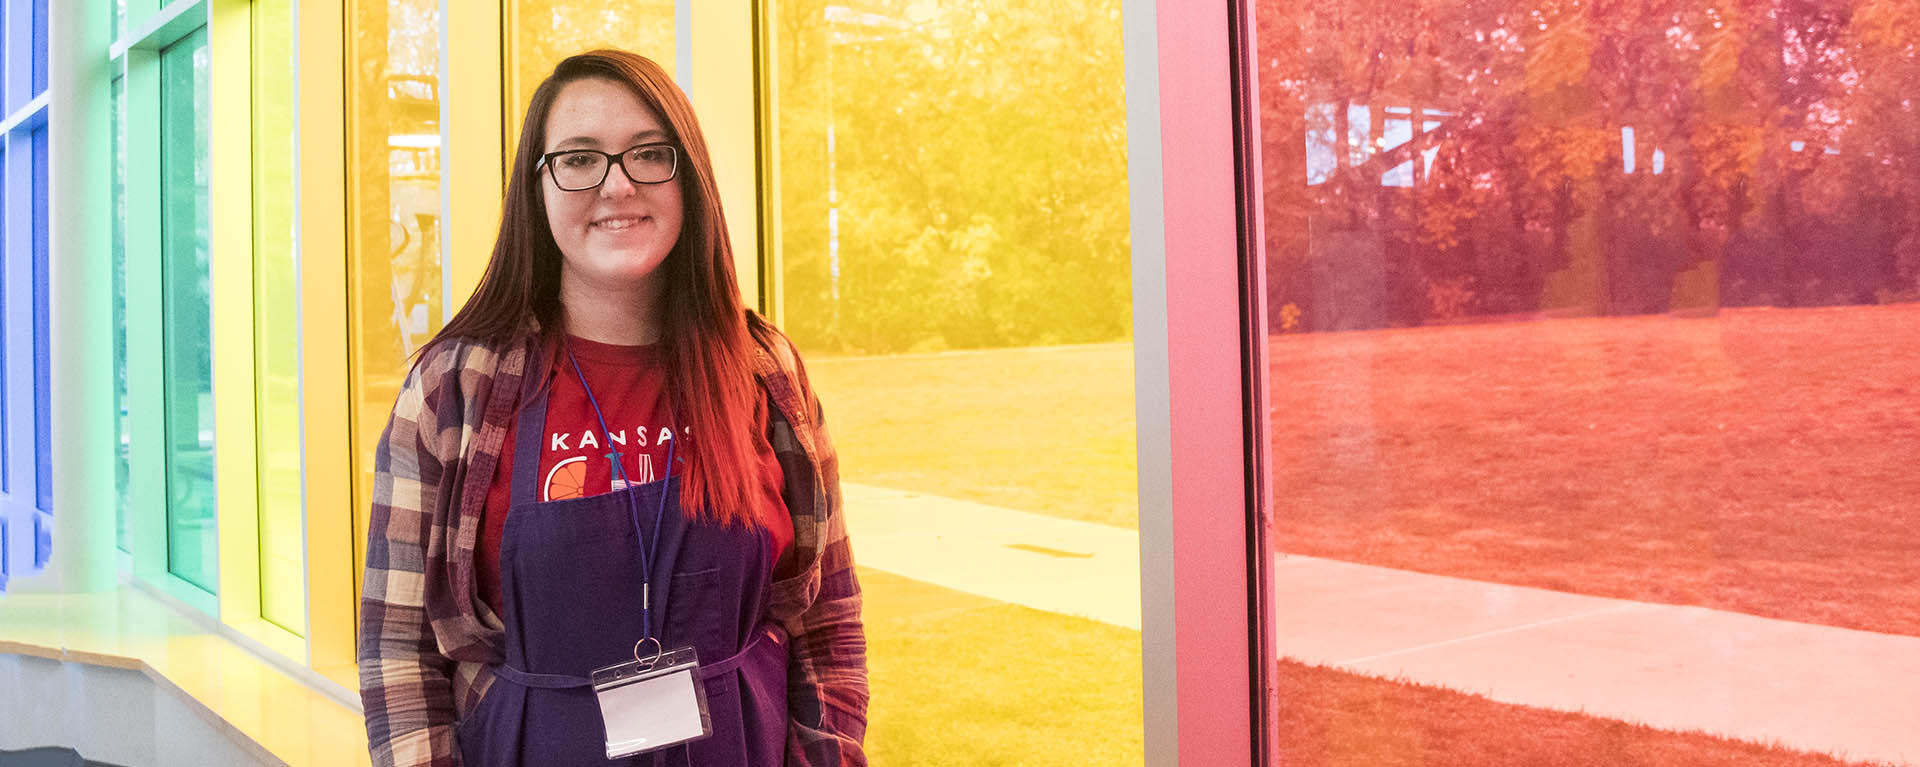 apeiron student smiling in front of colorful windows